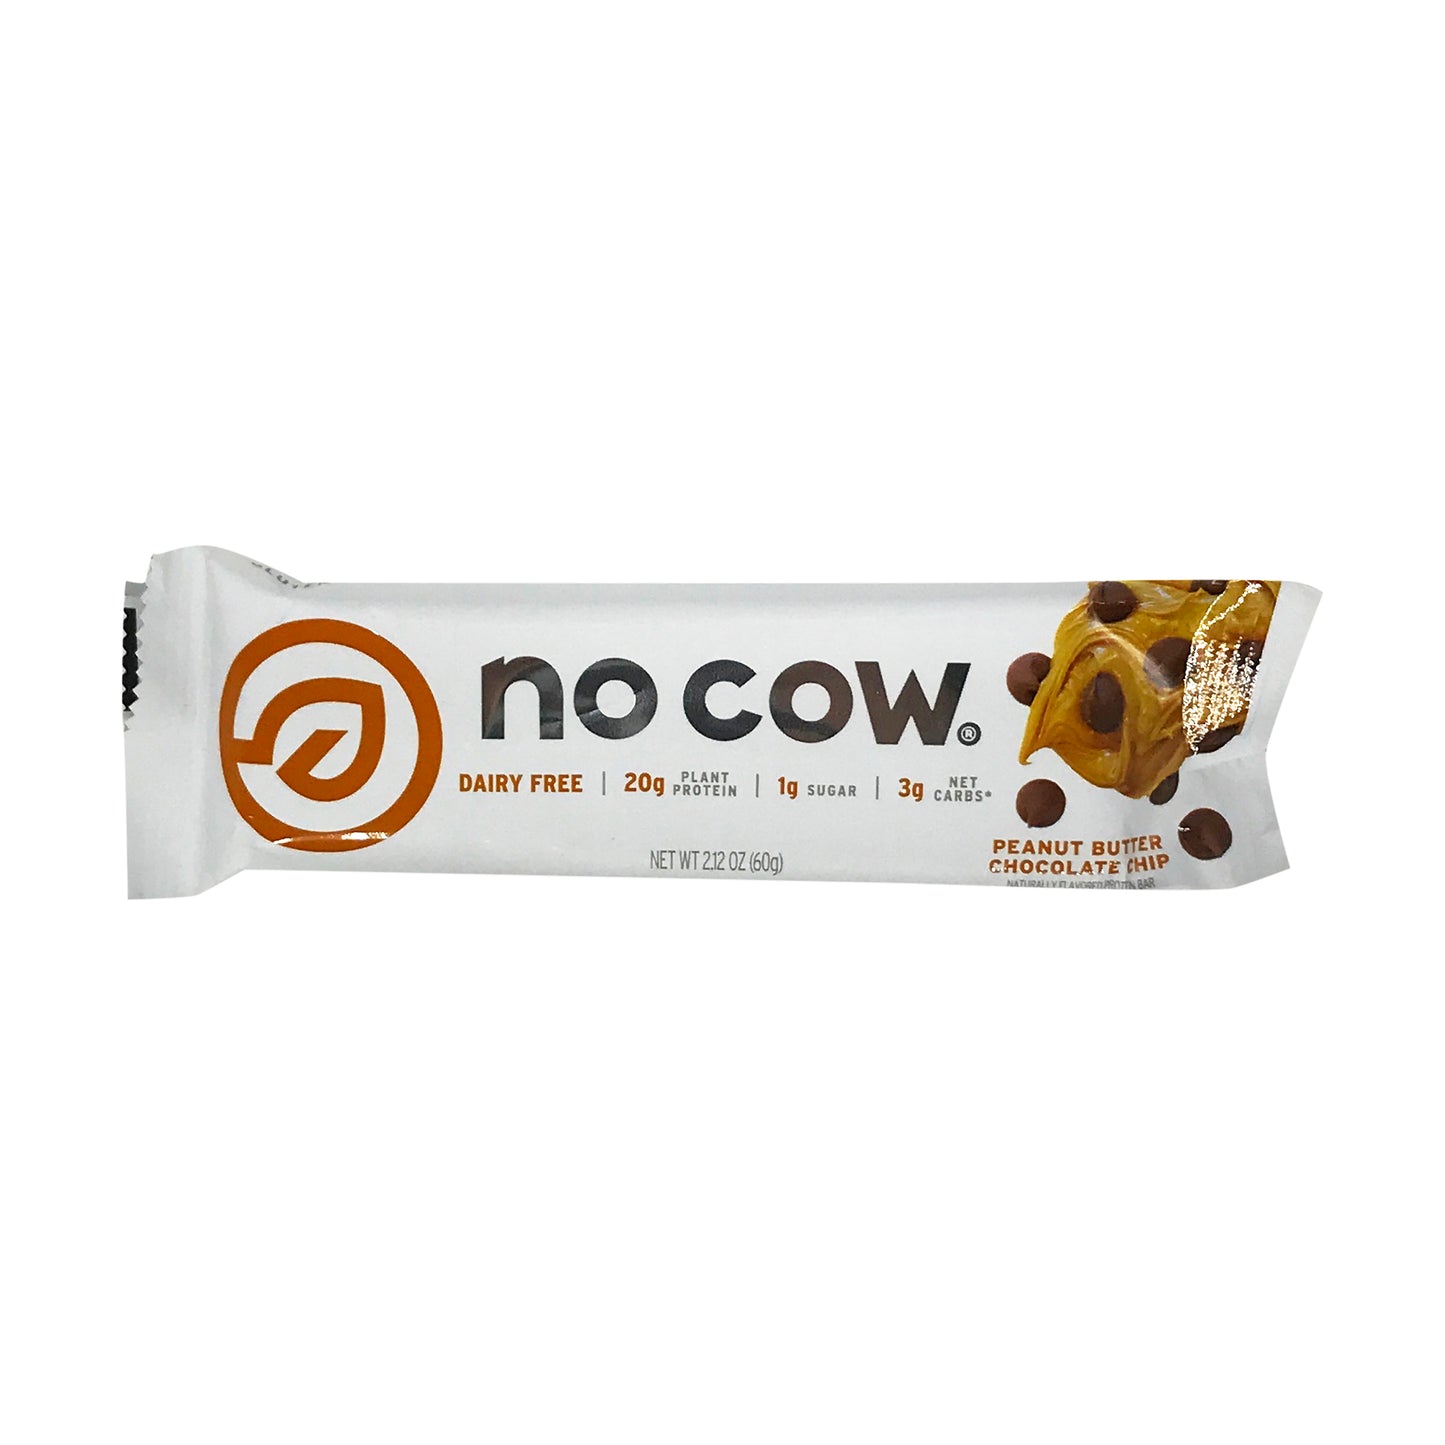 NO COW PEANUT BUTTER CHOCOLATE CHIP